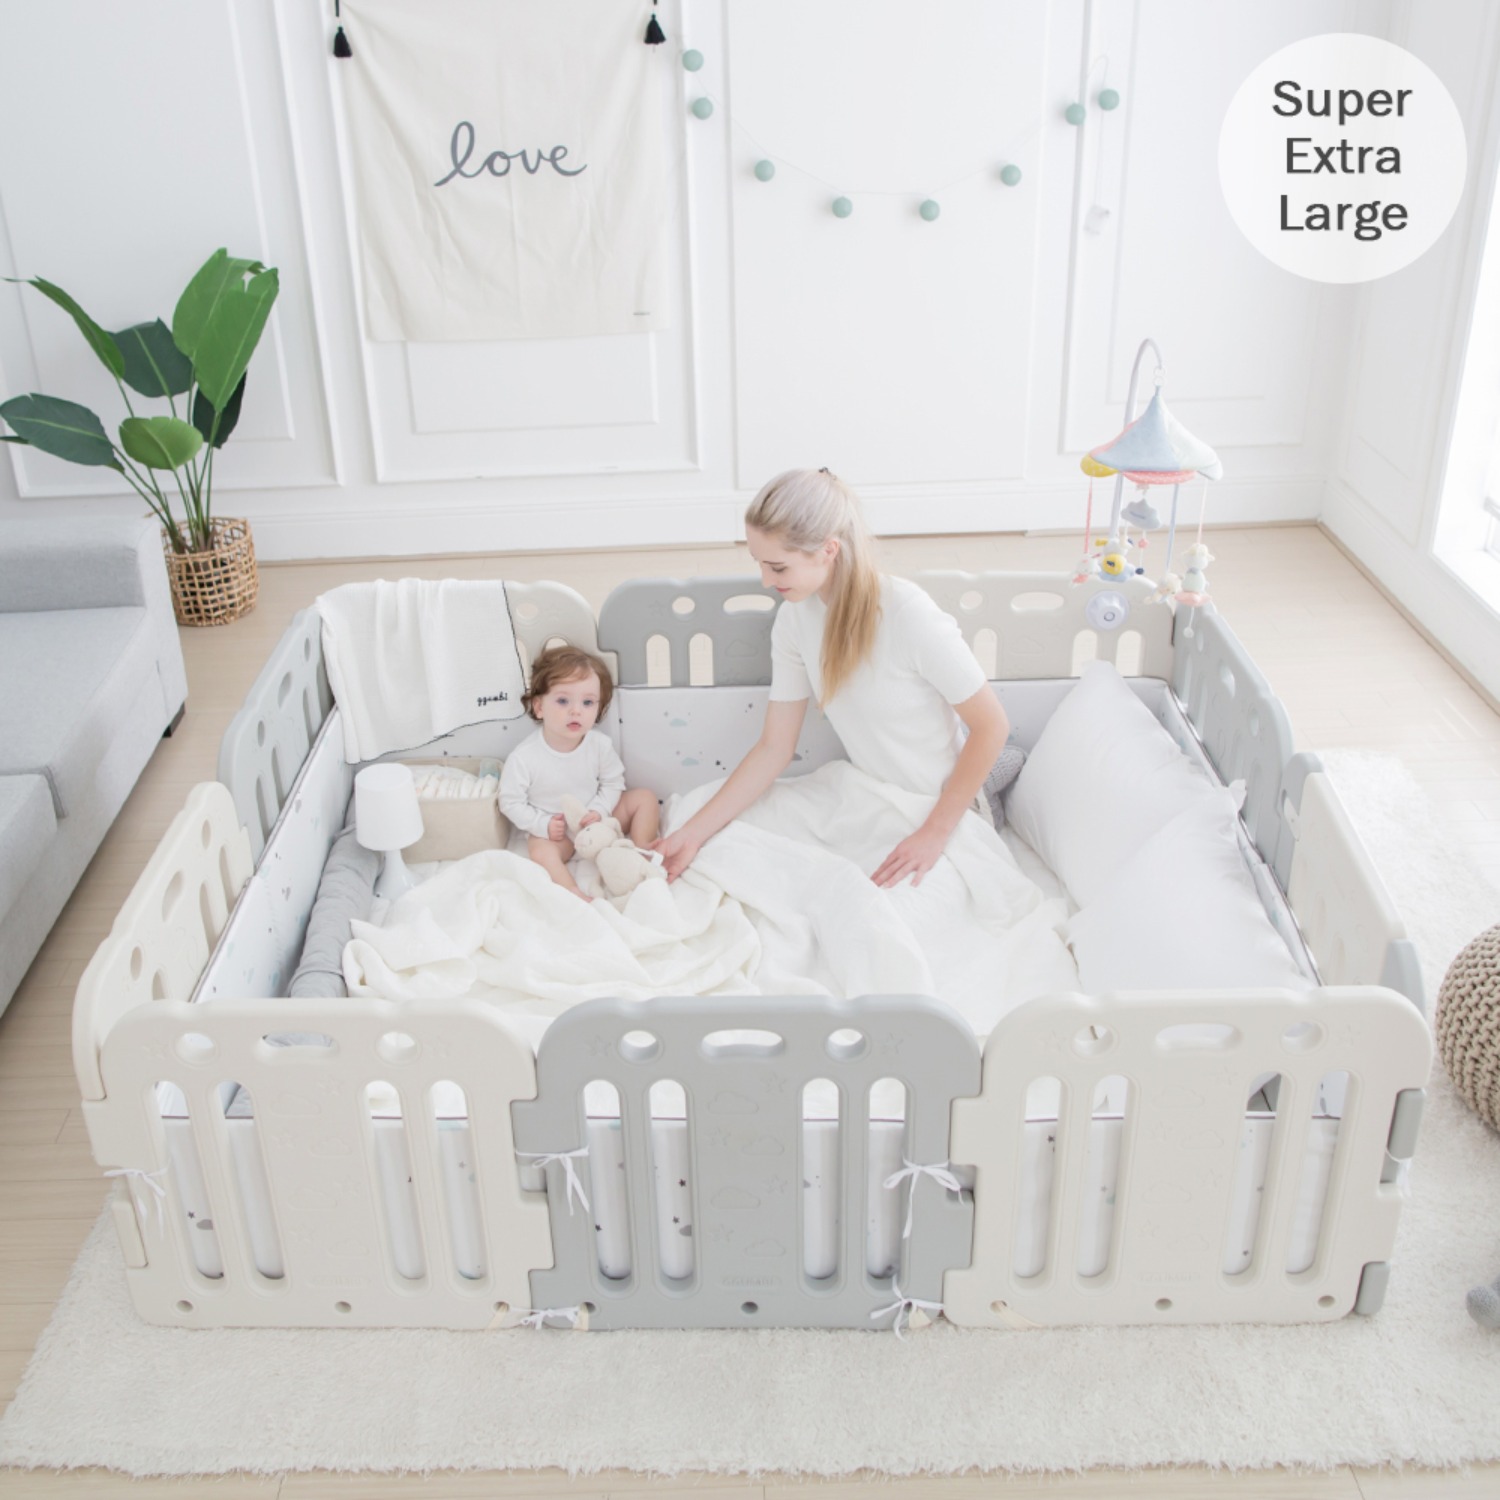 twin star plus bumper bed super extra large